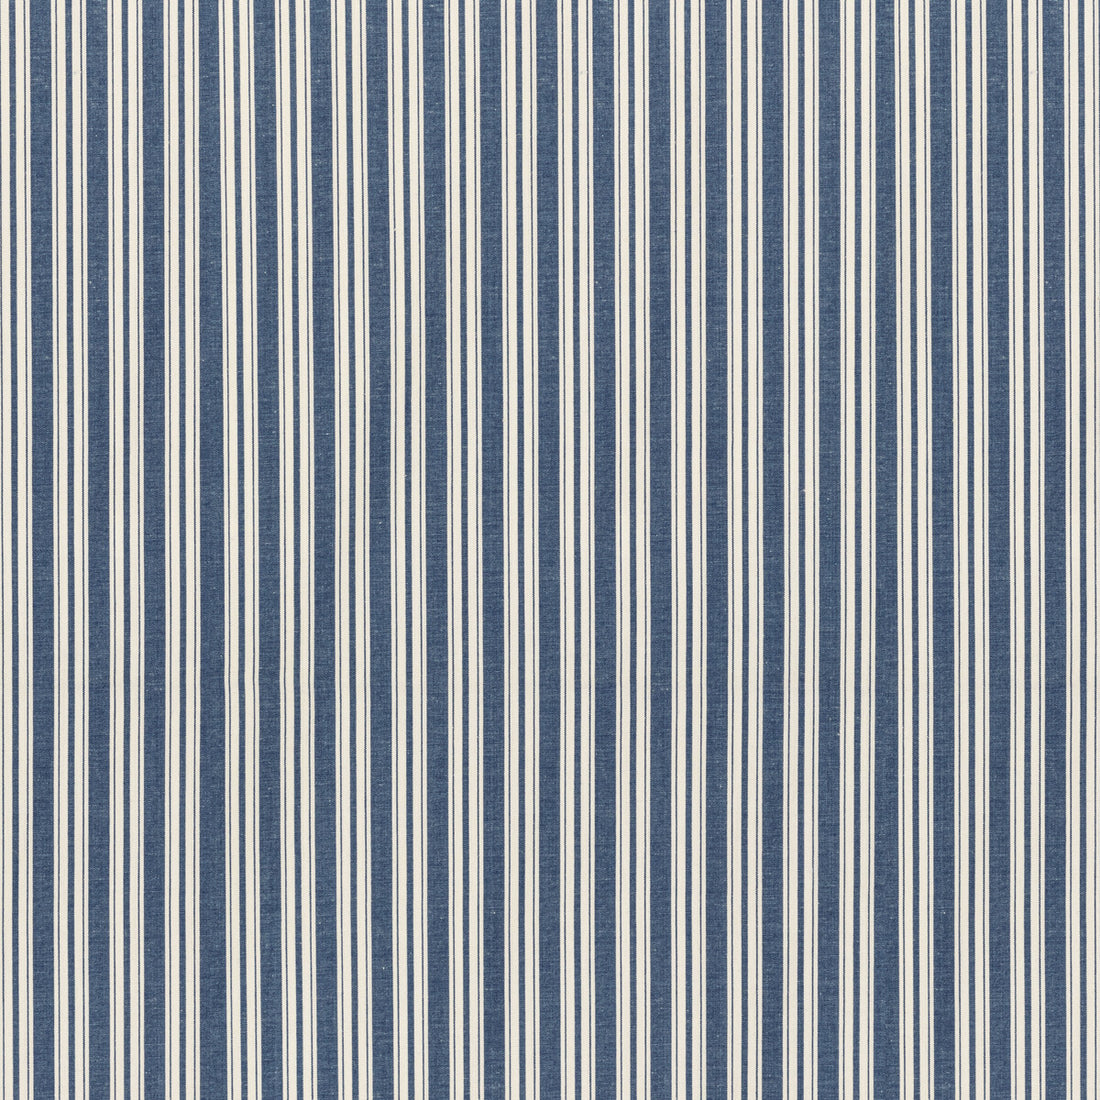 Selune Stripe fabric in navy color - pattern 8022118.50.0 - by Brunschwig &amp; Fils in the Normant Checks And Stripes II collection